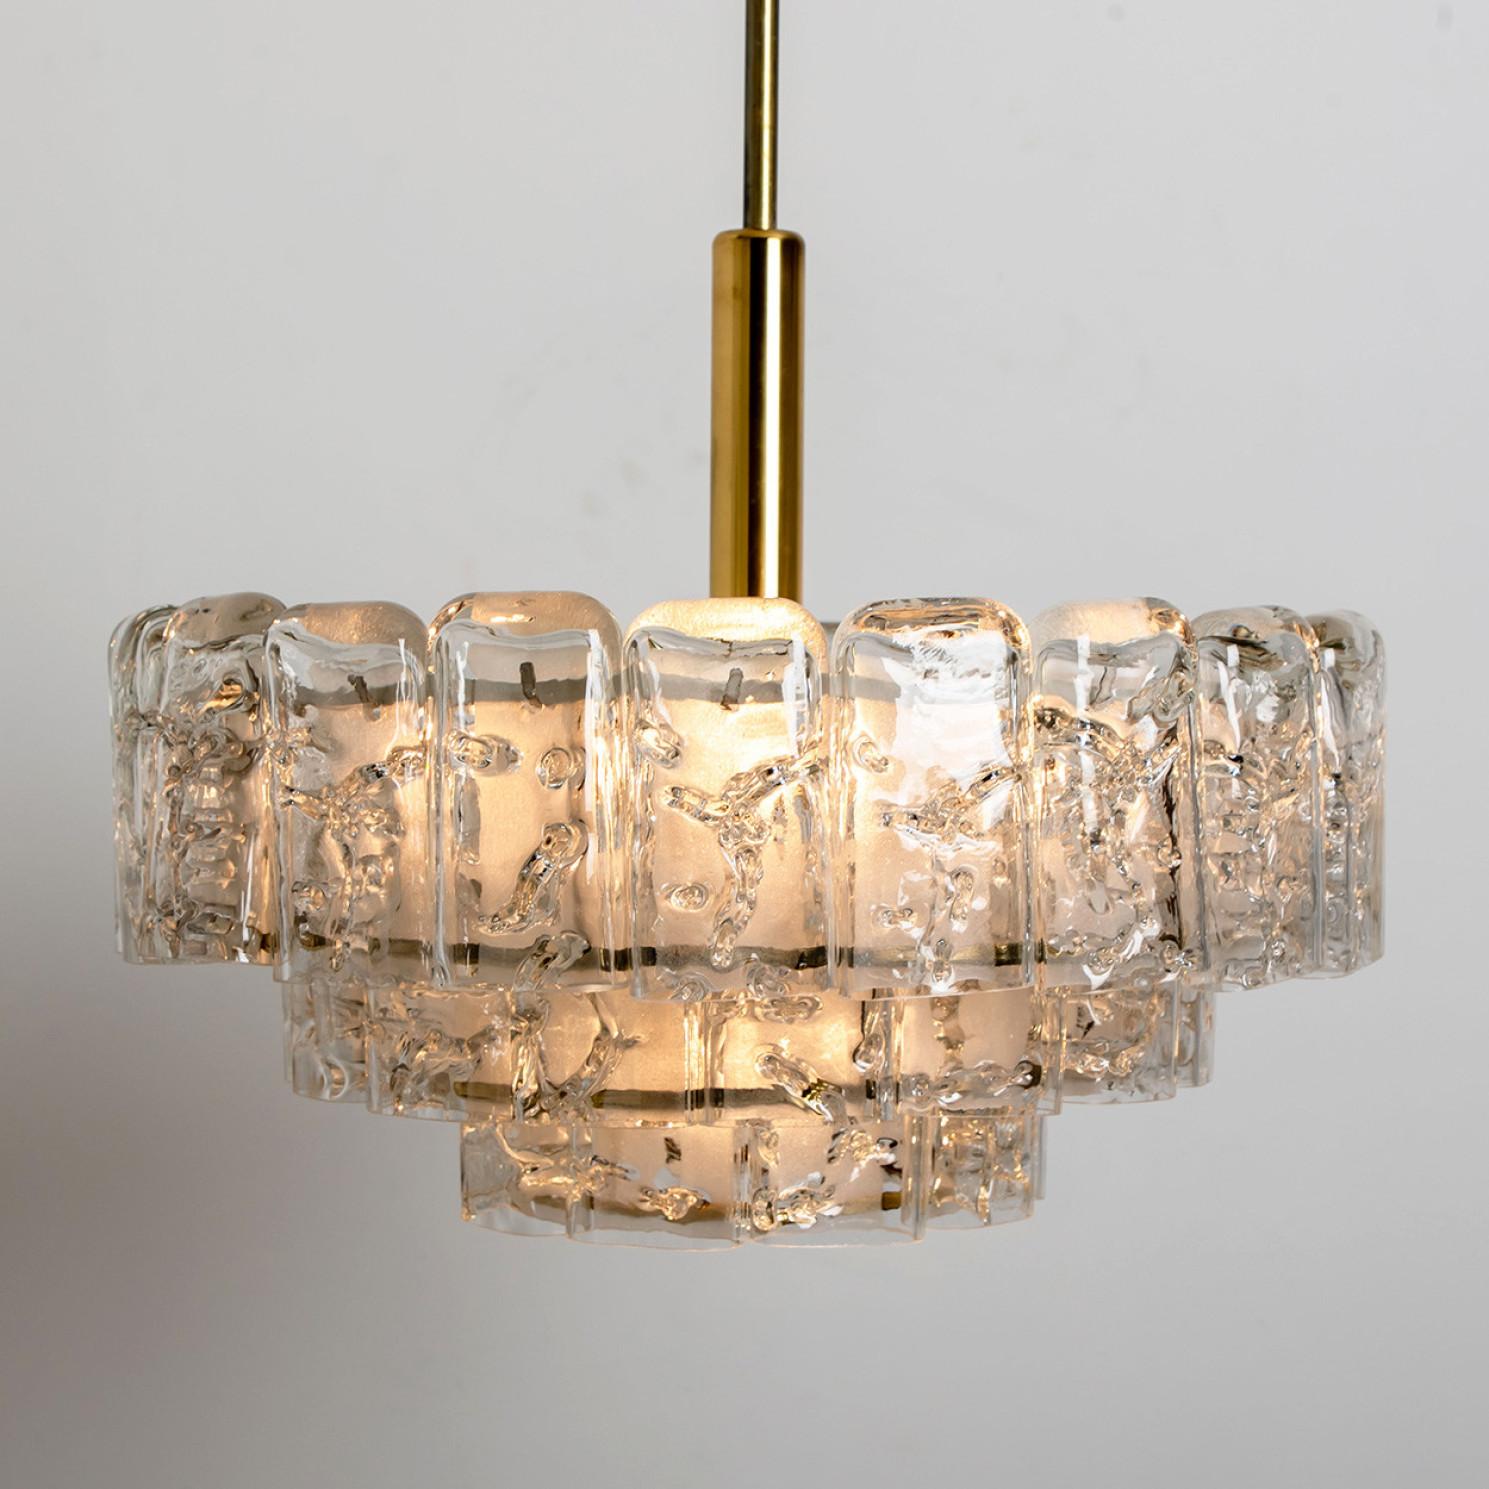 1 of the 2 Cylindrical 3 Tier Ice Glass Chandelier by Doria,  1960s For Sale 5